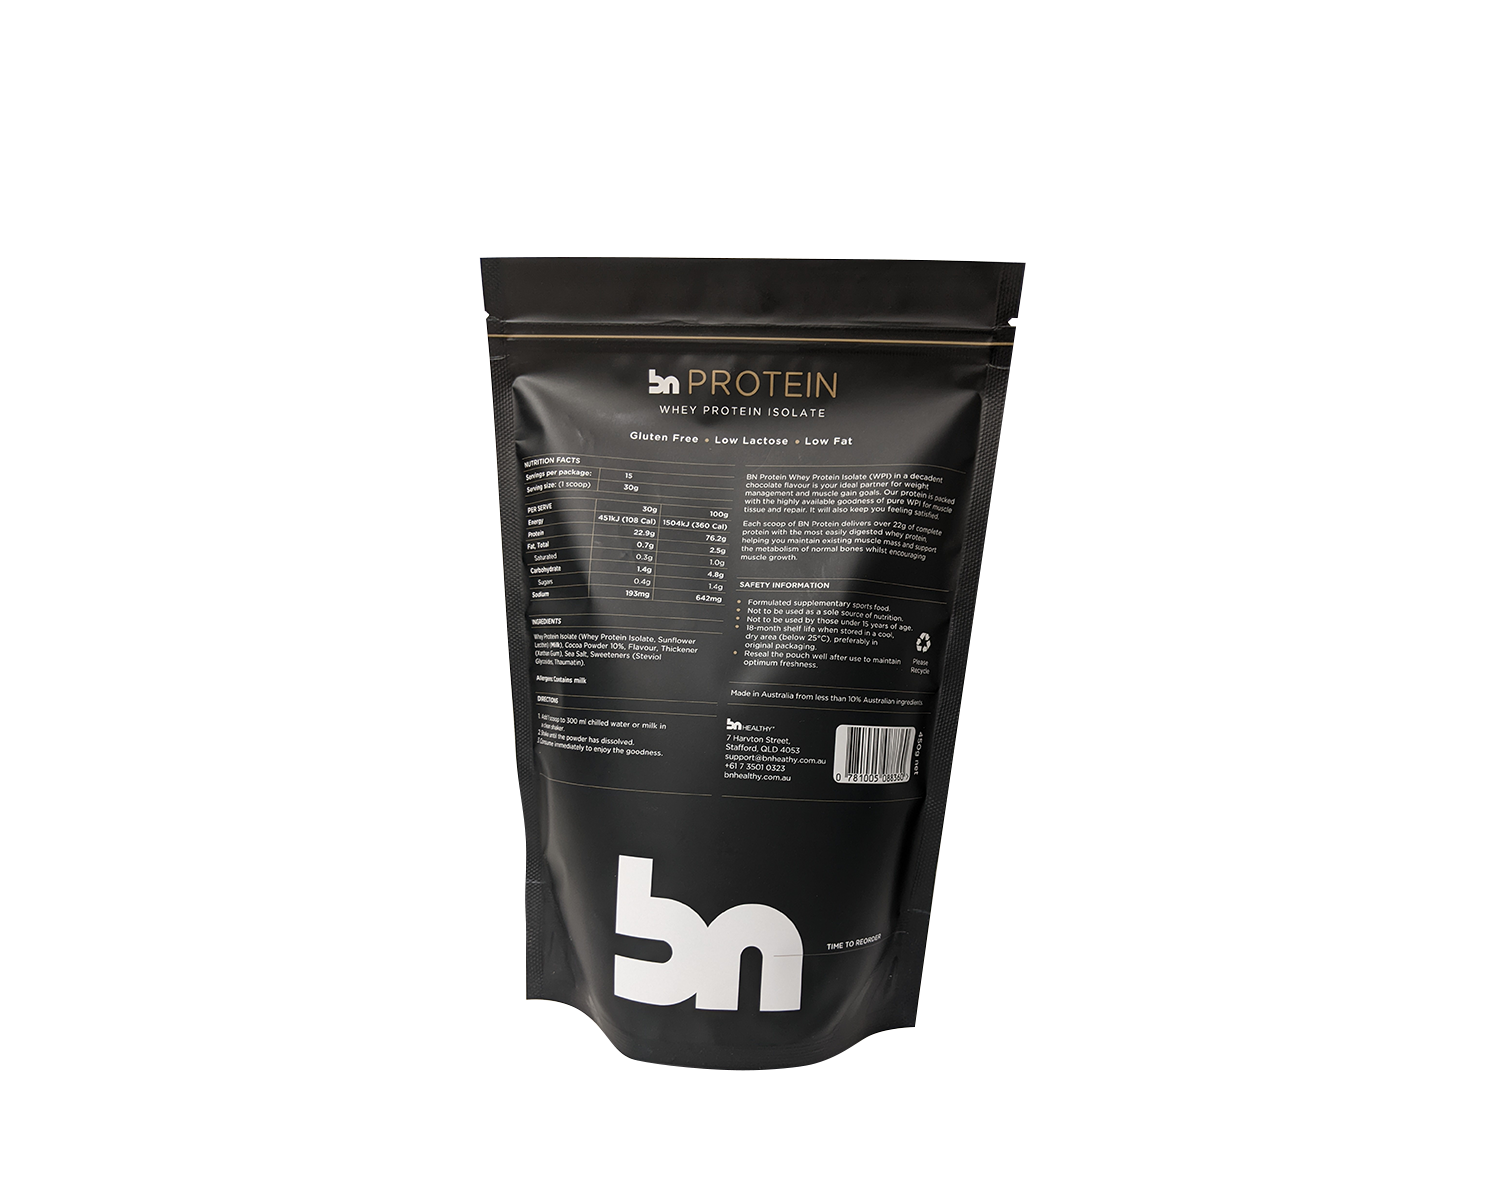 BN Protein - Flavoured WPI Powder chocolate flavour cover back